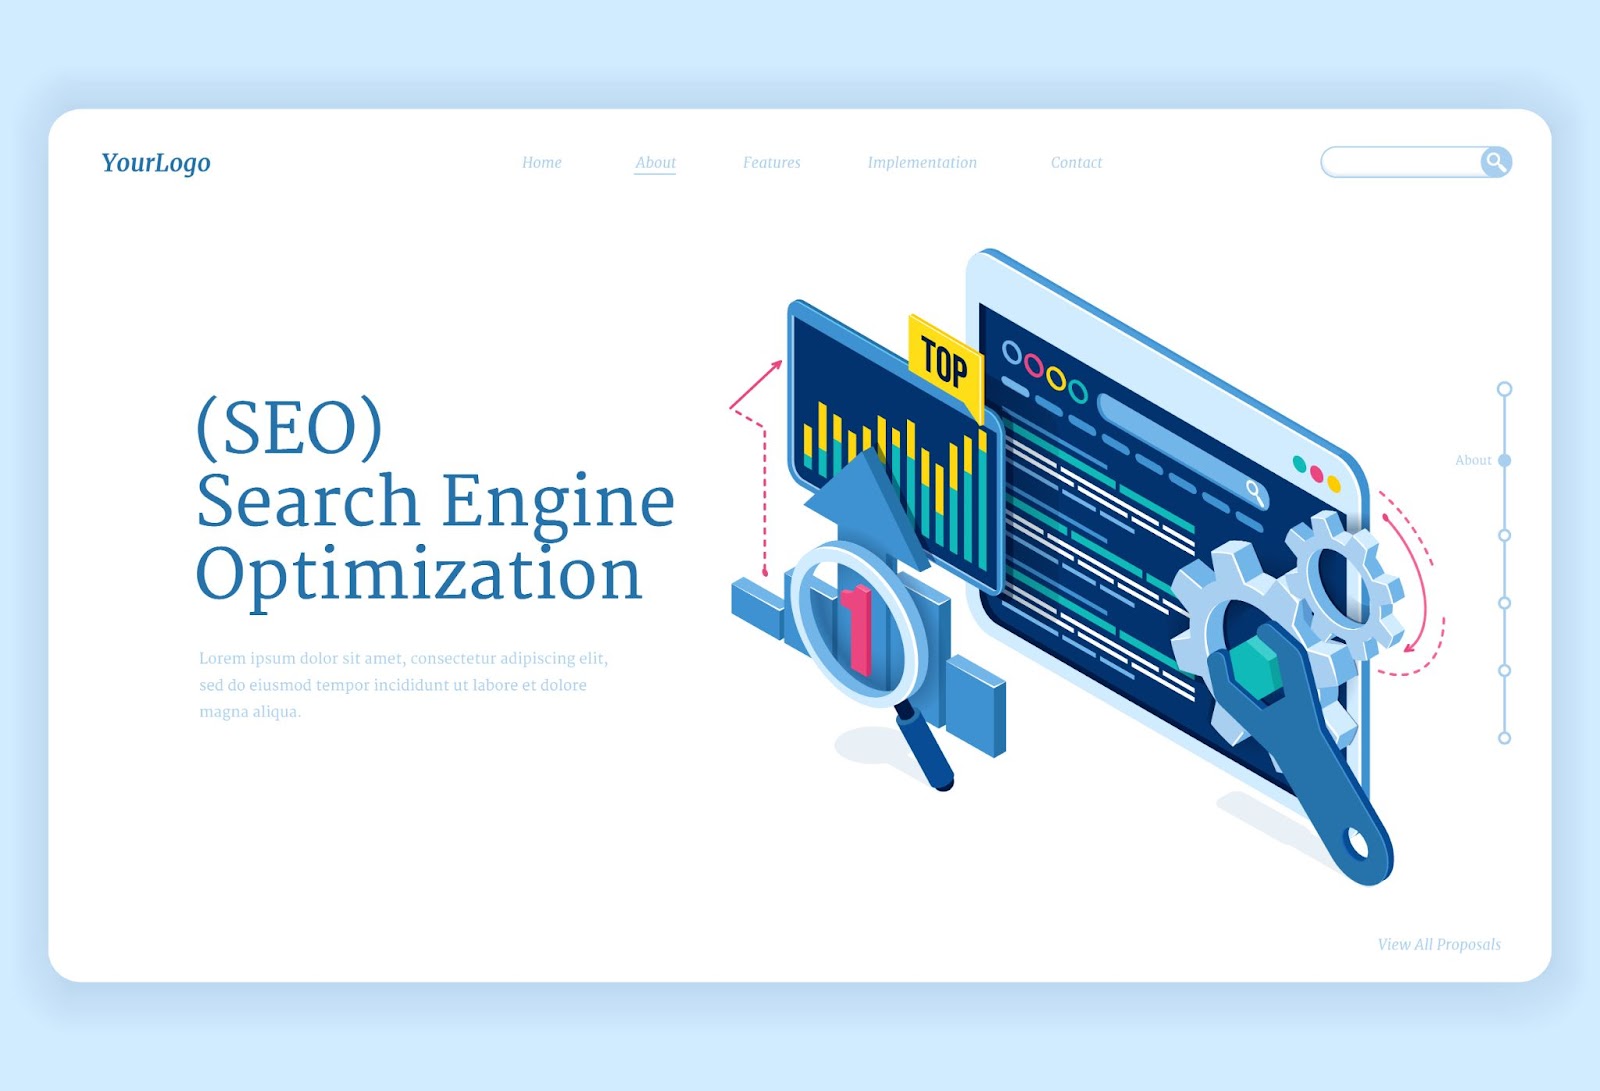 A landing page about search engine optimization